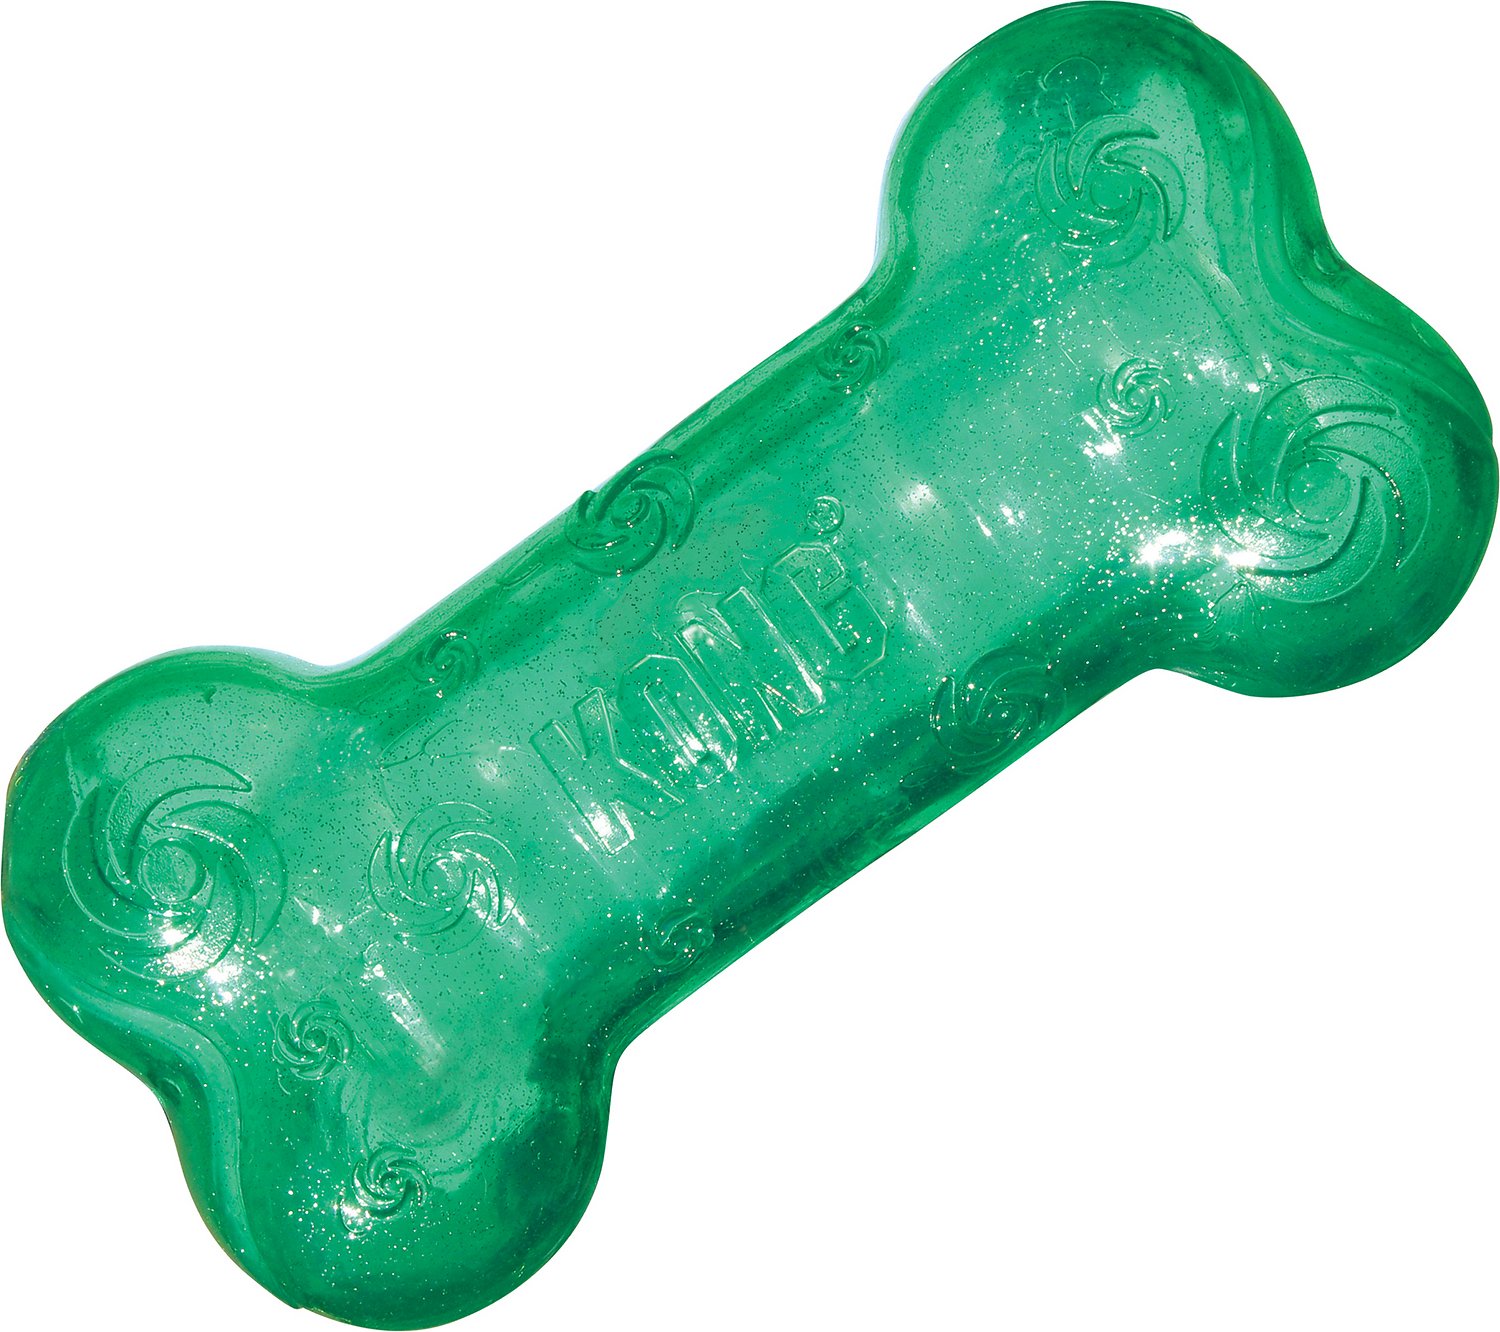 KONG Sqeezz Crackle Bone for Dogs - Large $5.59 at Chewy